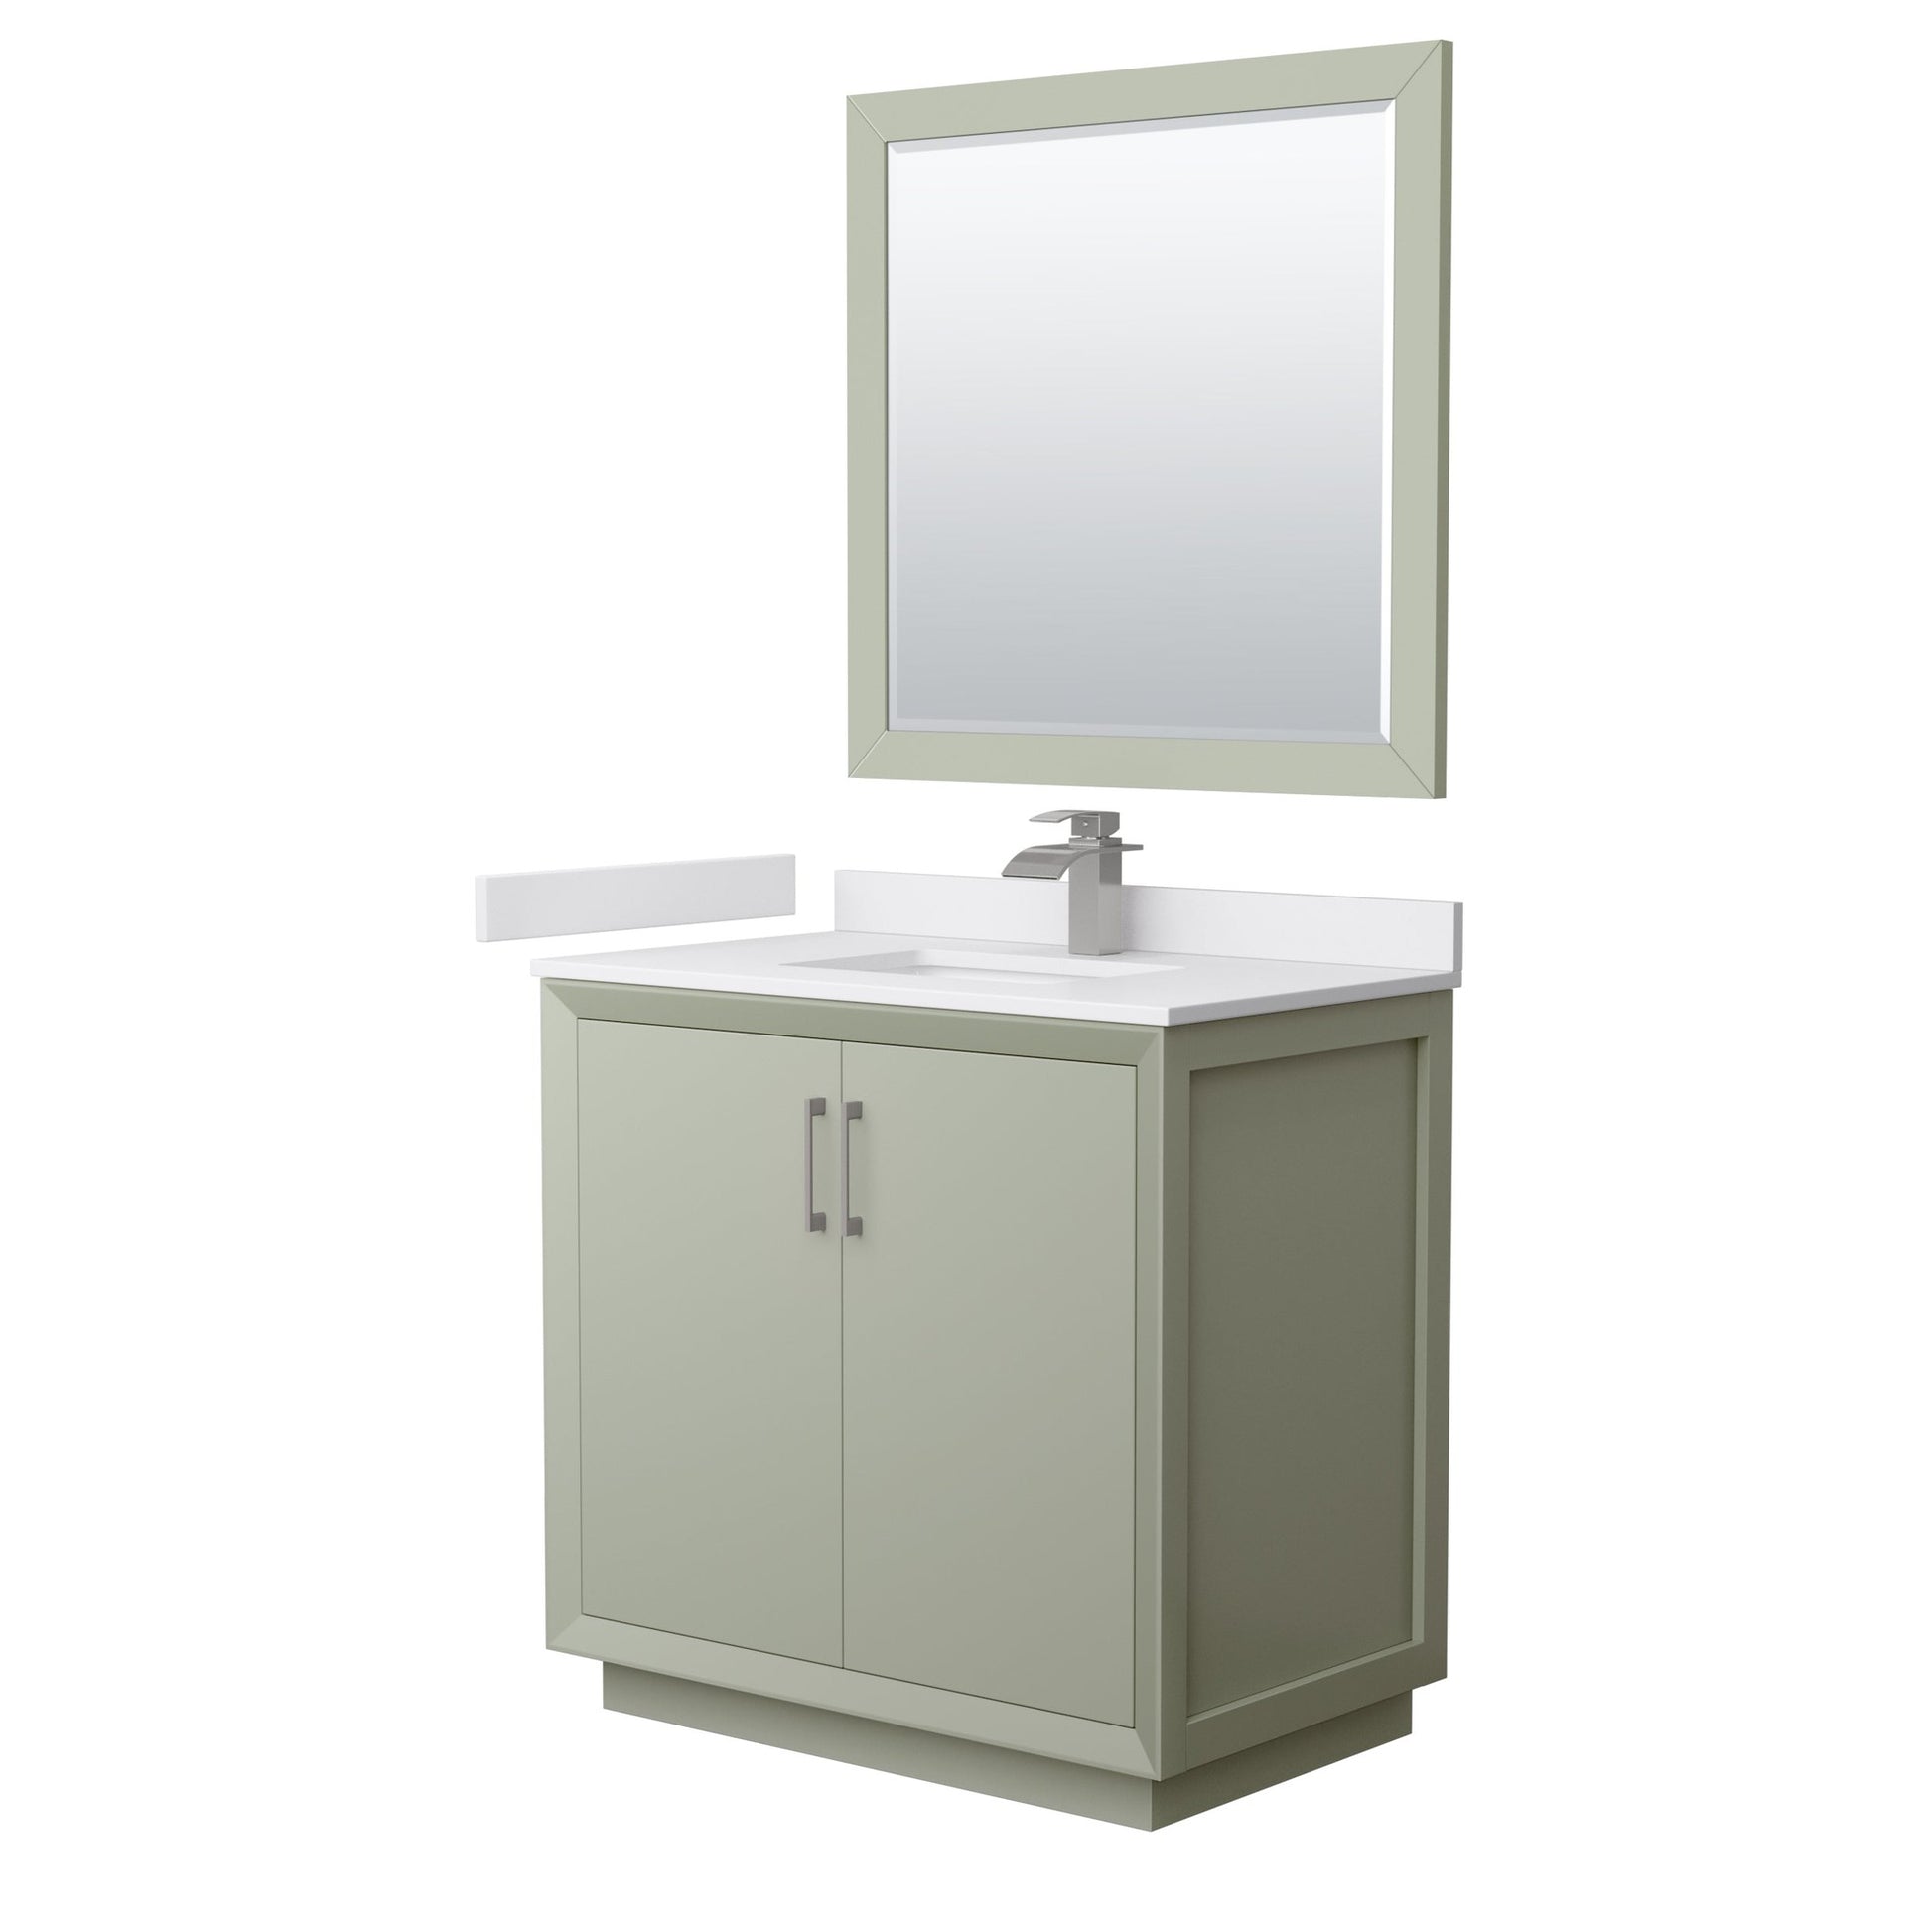 Wyndham Collection Strada 36" Single Bathroom Vanity in Light Green, White Cultured Marble Countertop, Undermount Square Sink, Brushed Nickel Trim, 34" Mirror